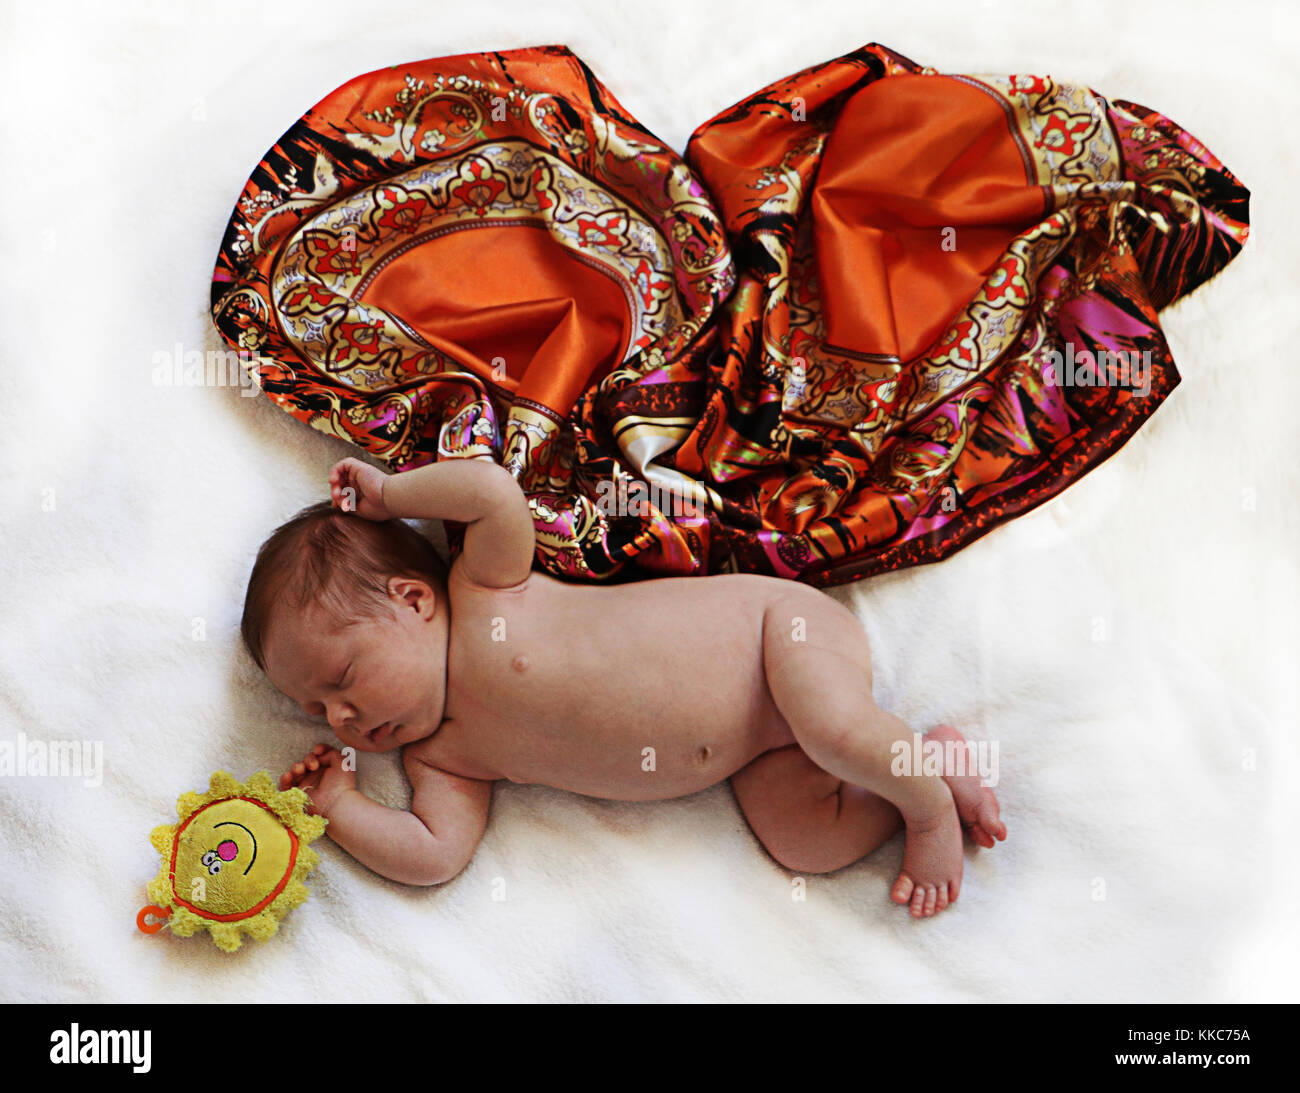 Cute newborn few days old baby with colored butterfly wings made of fabric sleeping on white blanket. Stock Photo